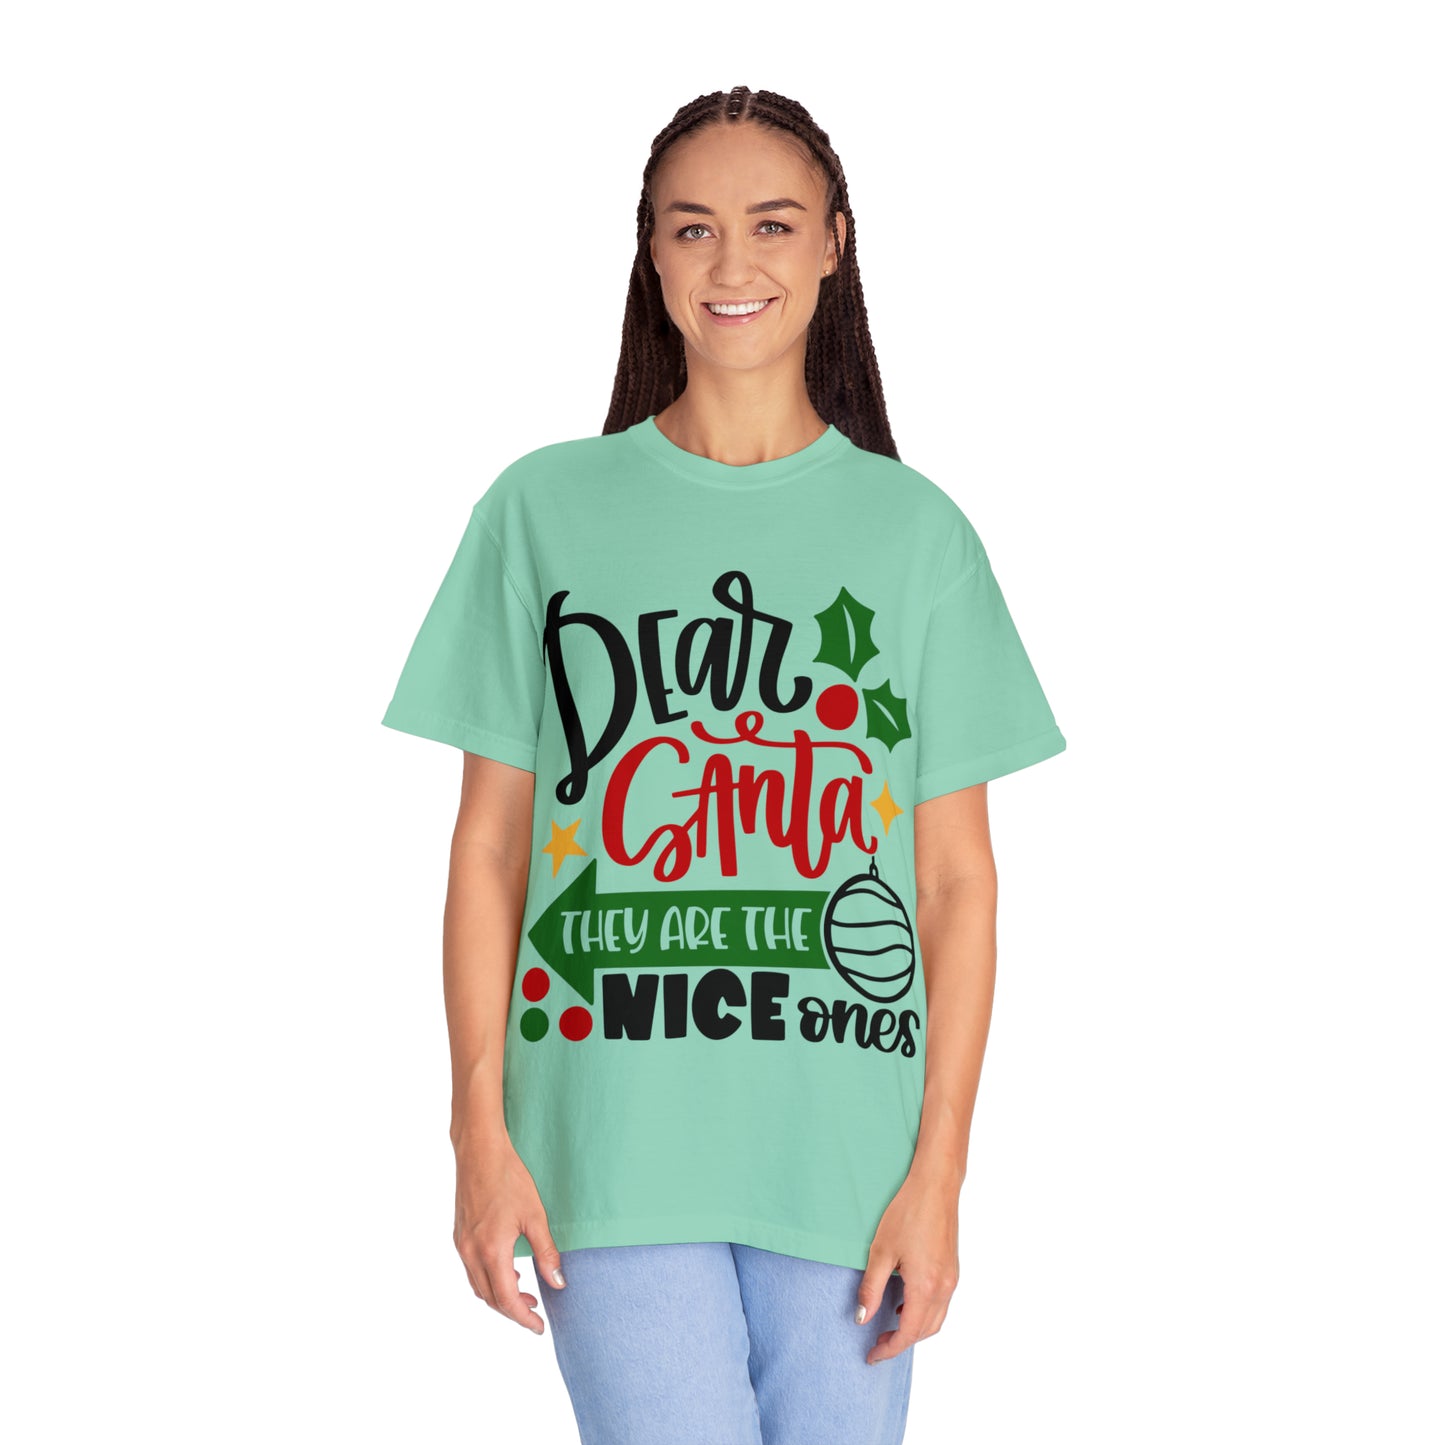 They Are the Naughty Ones Unisex Garment-Dyed T-shirt